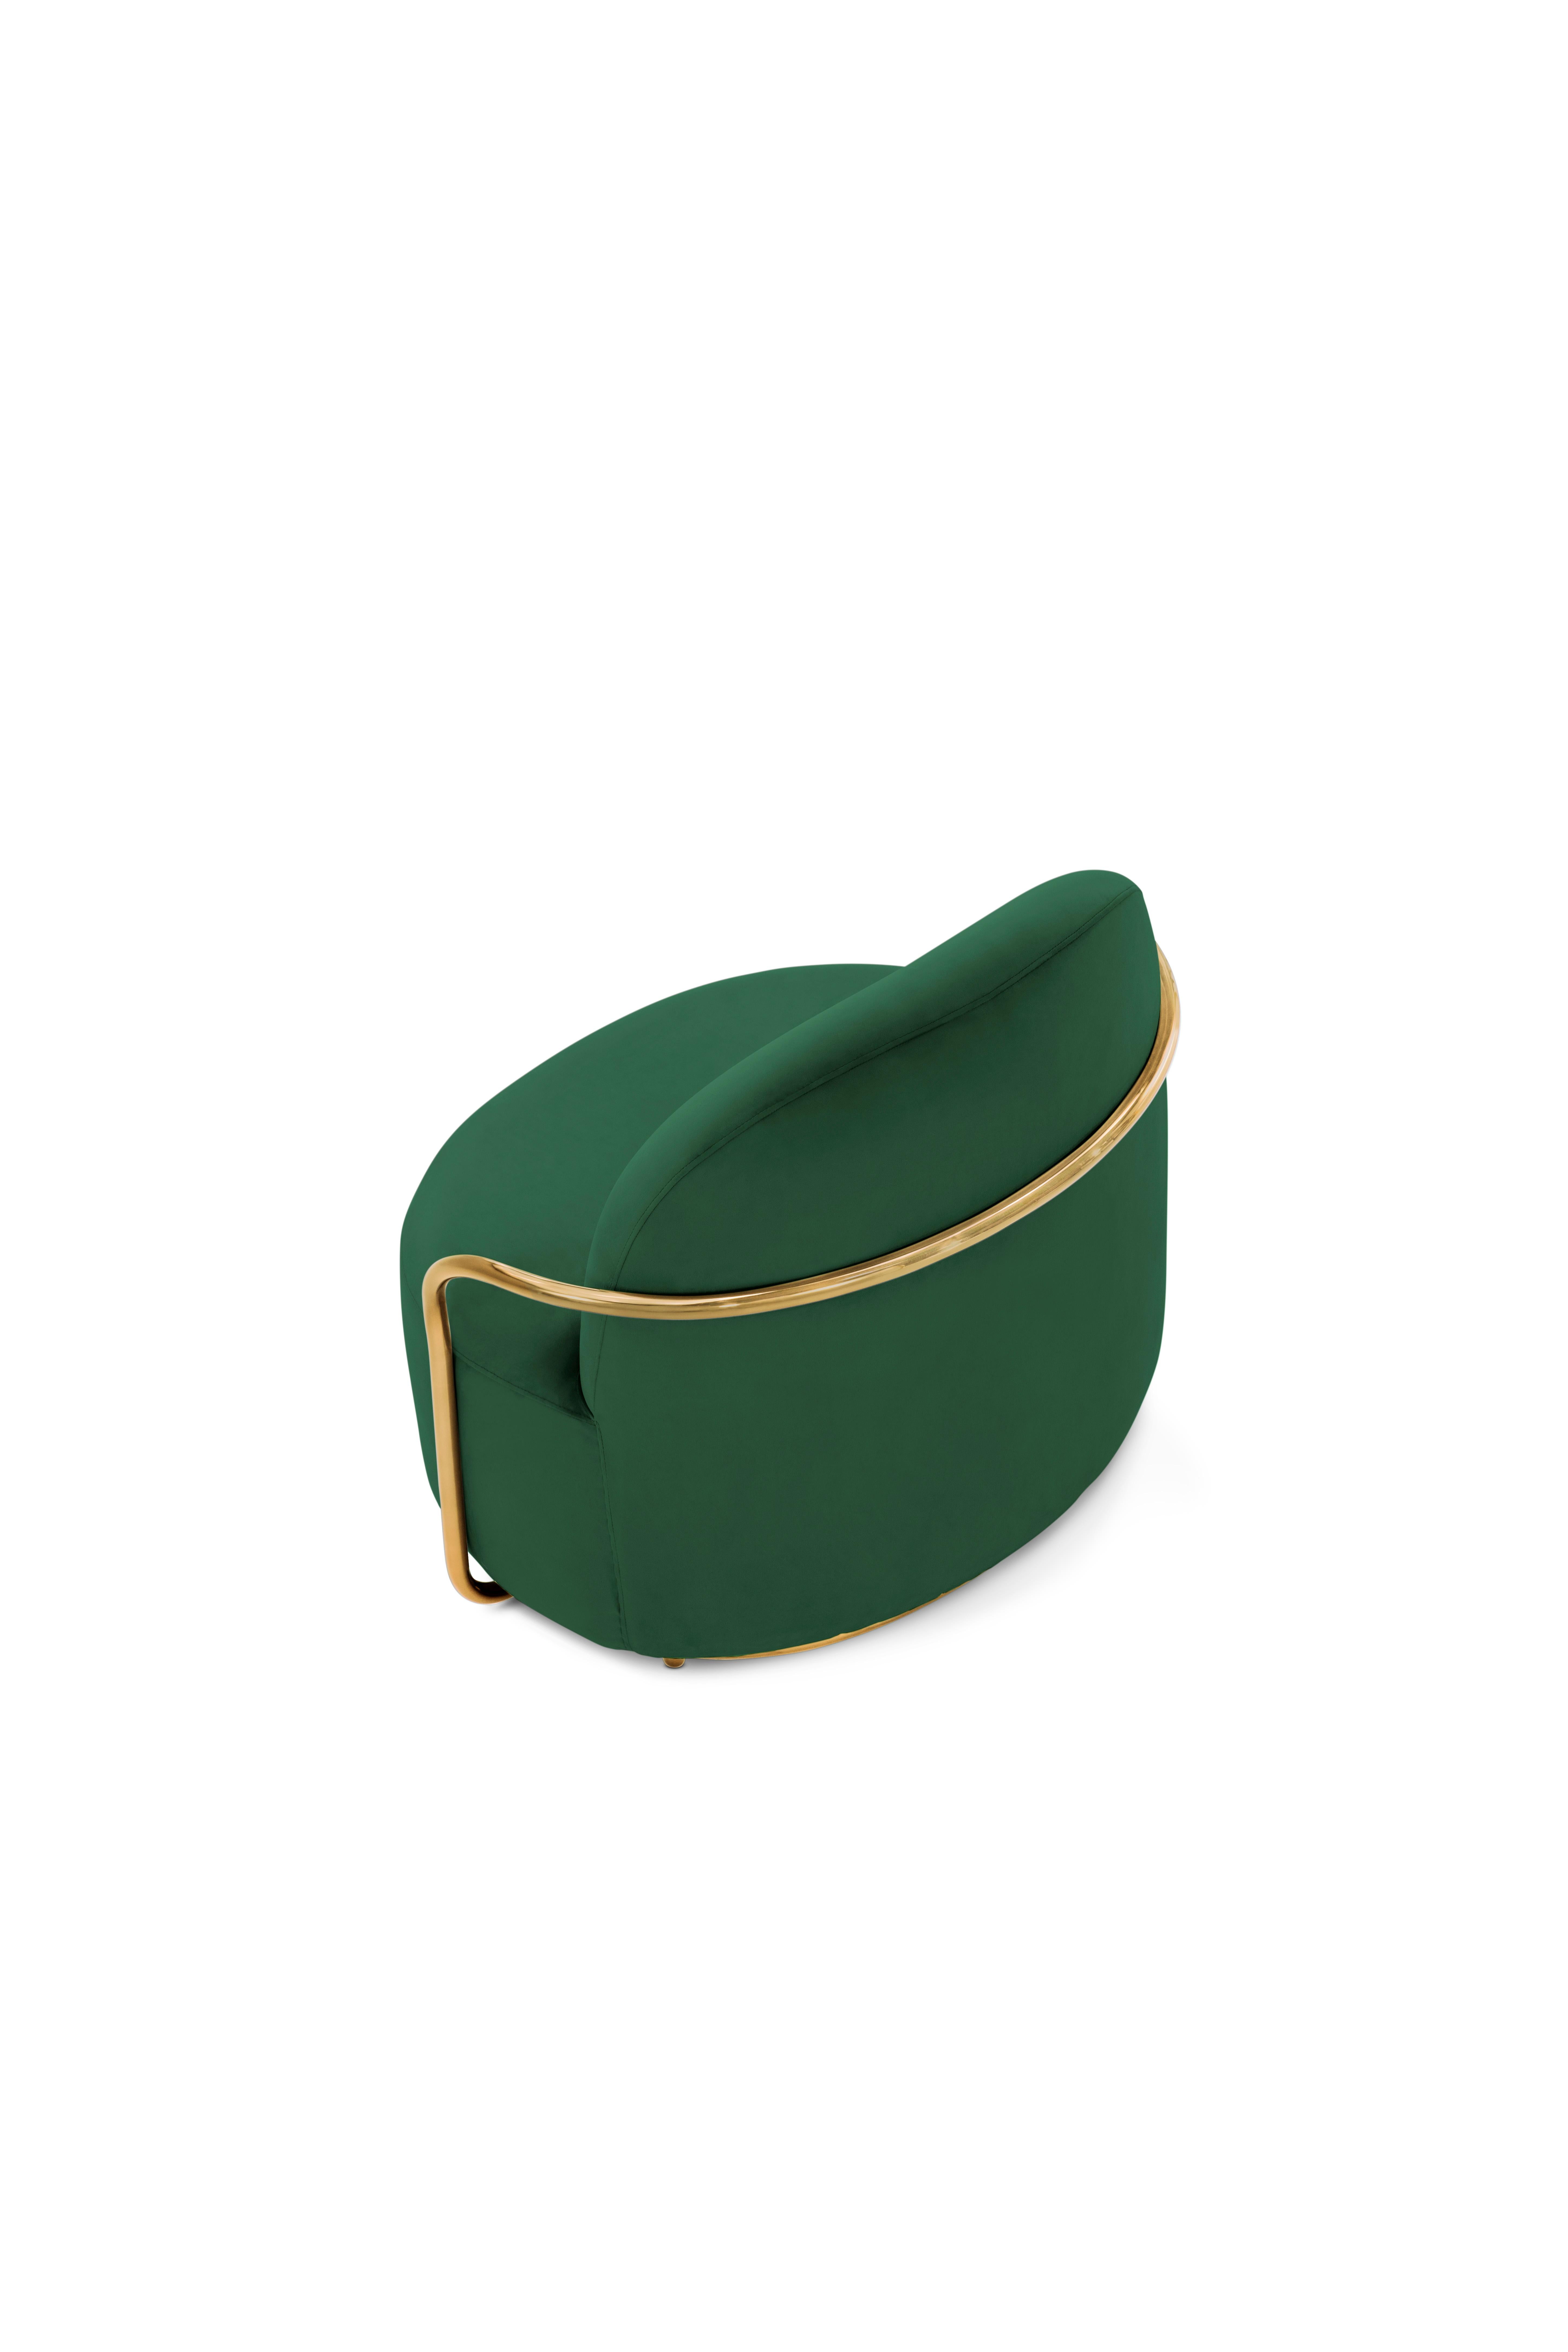 Hand-Crafted Orion Lounge Chair with Plush Green Velvet and Gold Arms by Nika Zupanc For Sale